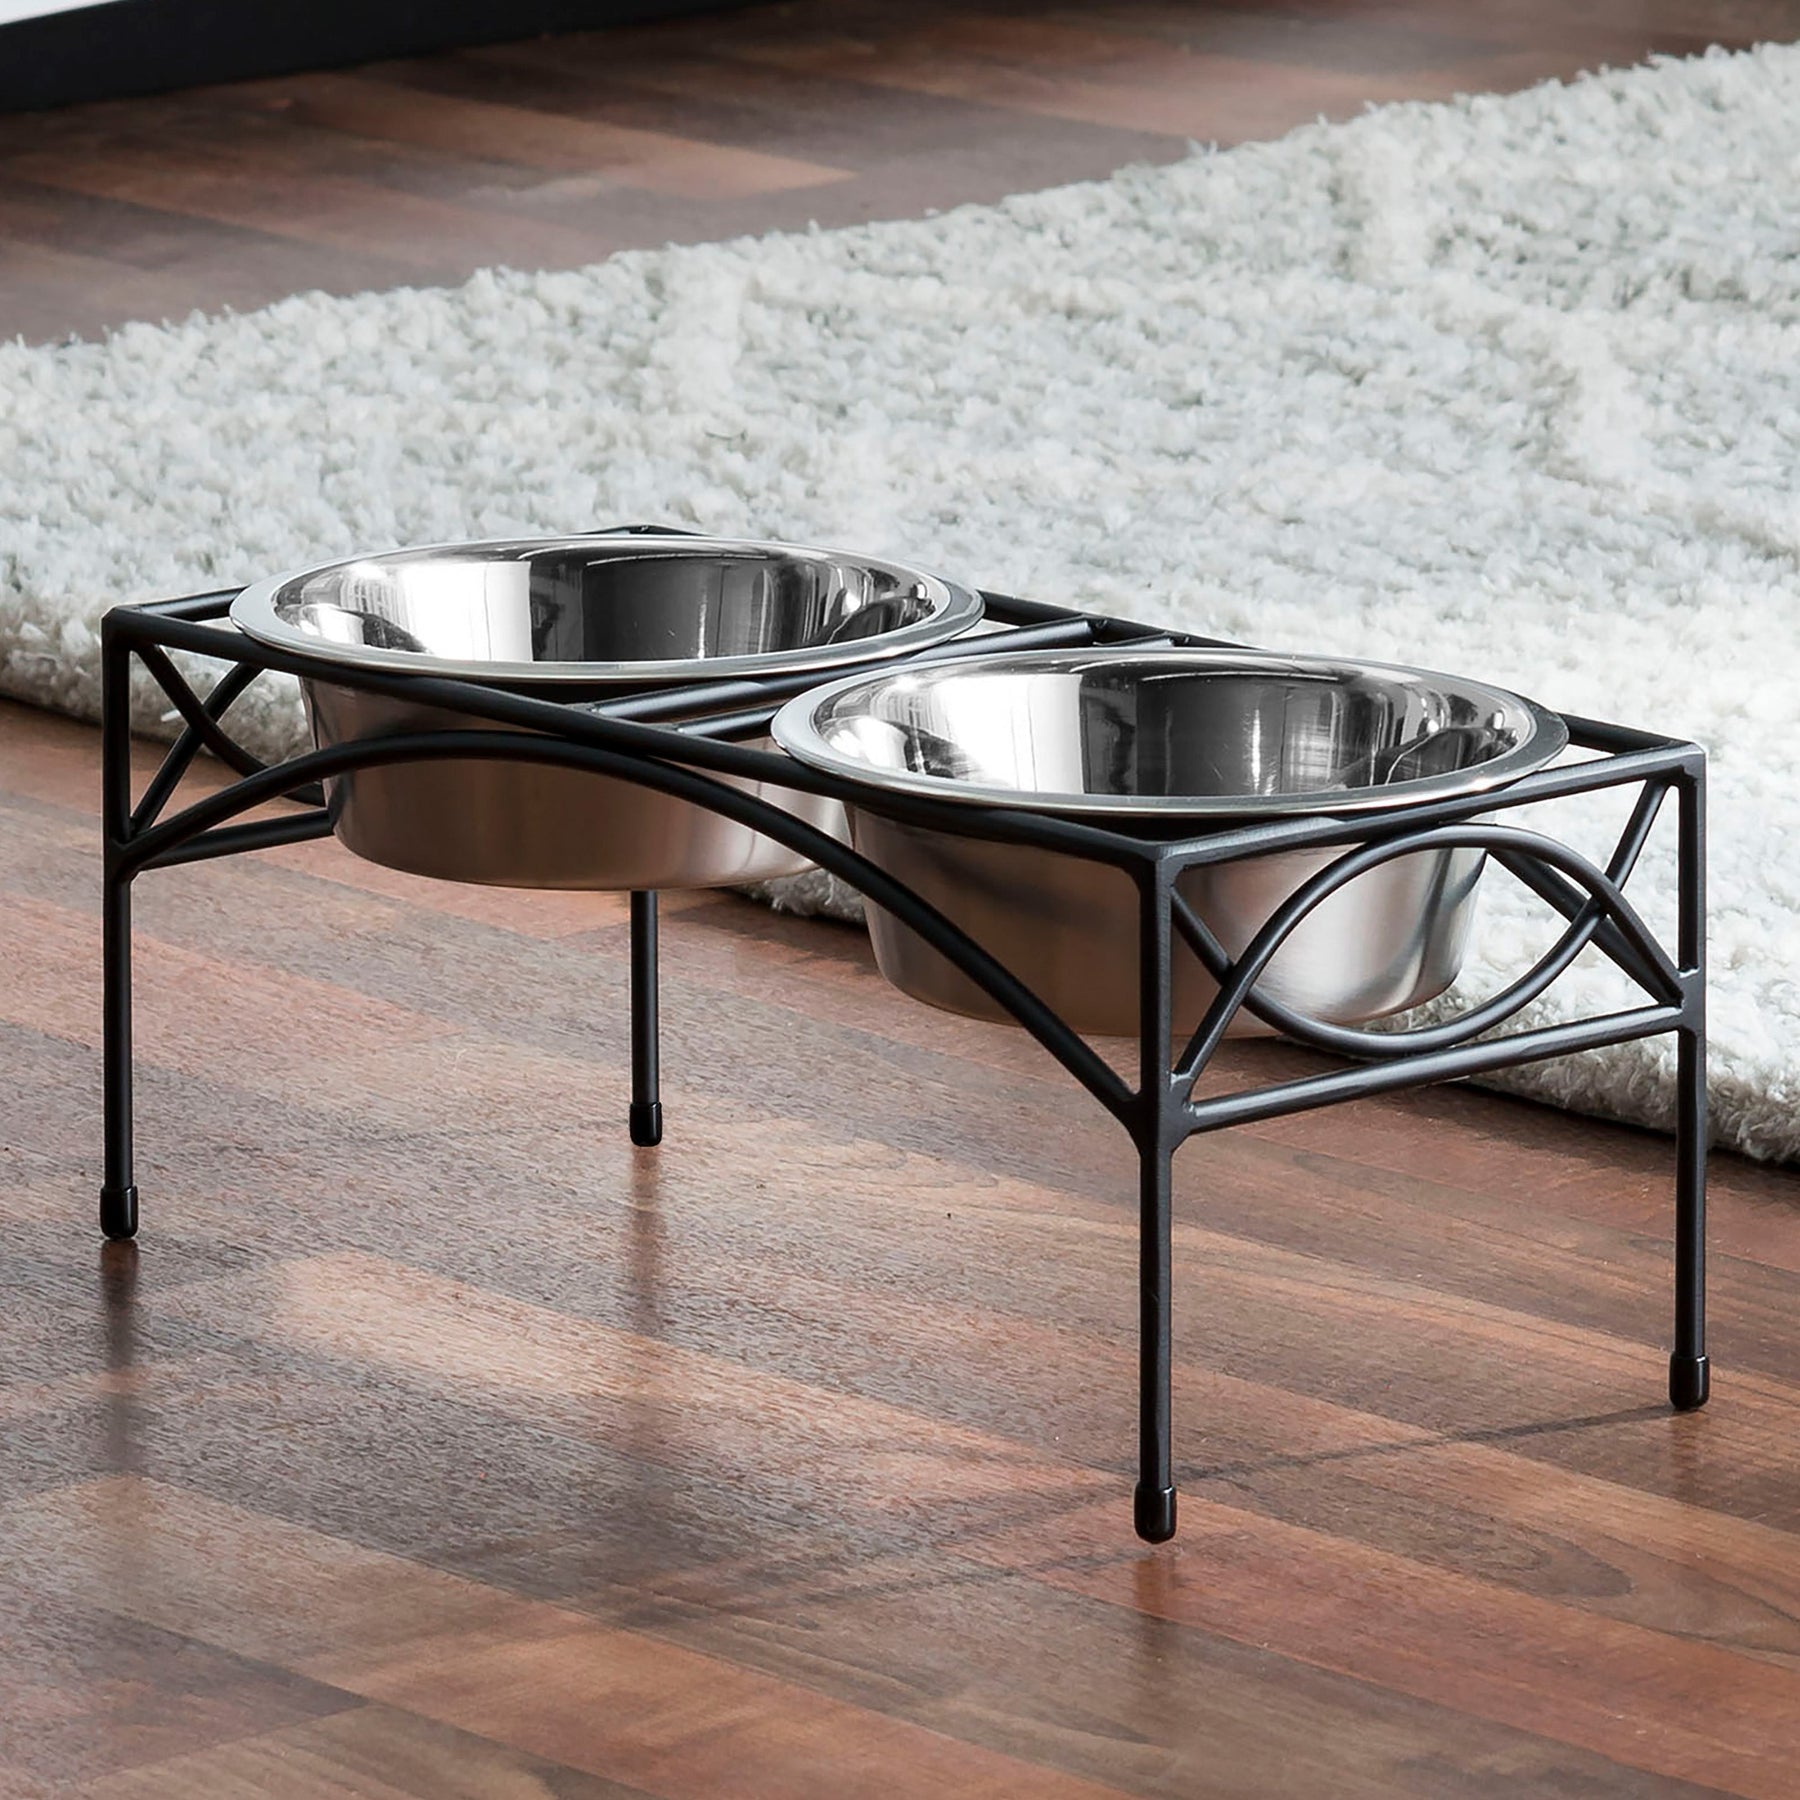 https://nmndesigns.com/cdn/shop/products/Regal-Elevated-Dog-Bowls-Small-Dog-Wrought-Iron-Metal-Stainless-Steel-Bowls-RDB9-RegalDoubleBowlDogDiner-KitchenShot2021-300dpi_1800x1800.jpg?v=1704014165